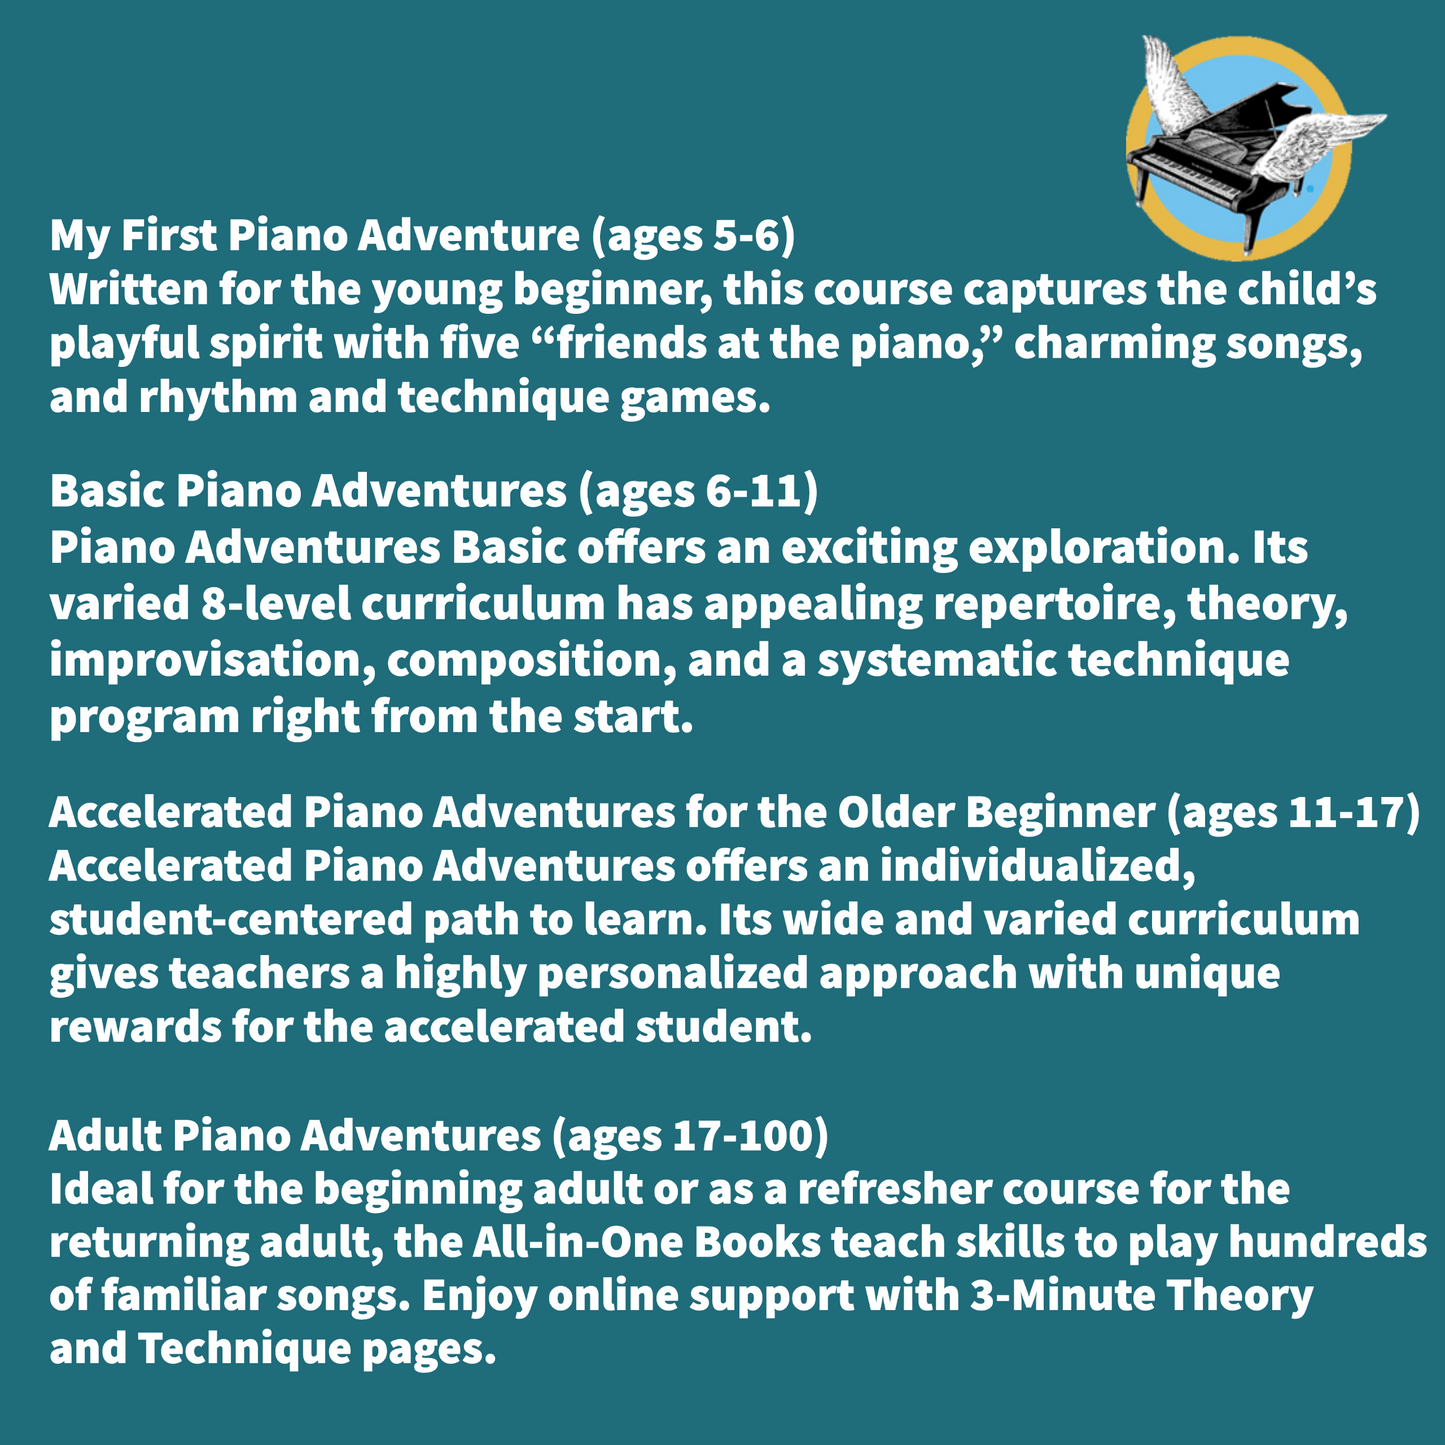 Piano Adventures: All In Two -Level 2B Lesson & Theory Book Keyboard